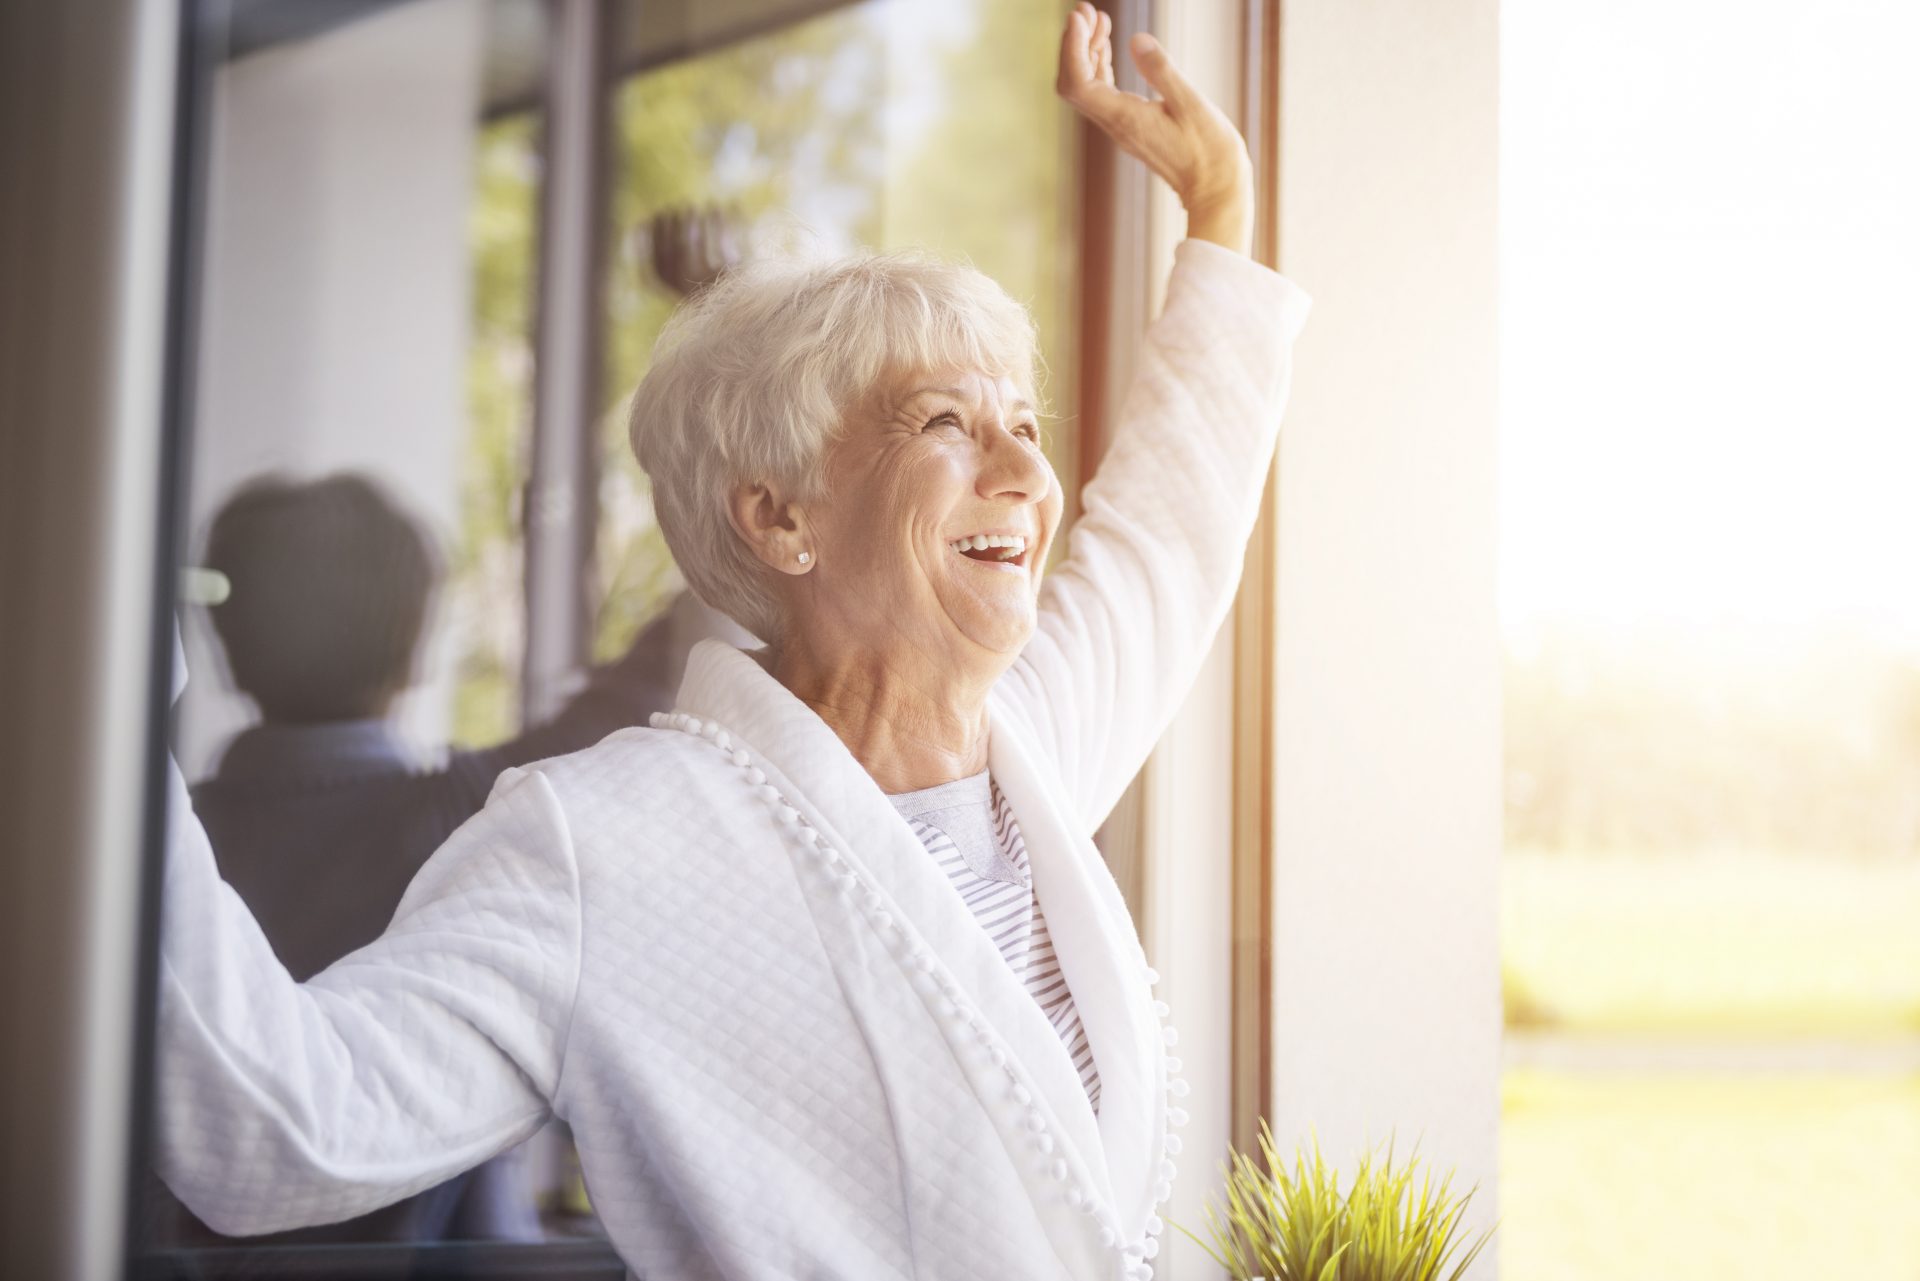 Elderly woman smiling and raising her arm while looking out of a sunny window in a unit.